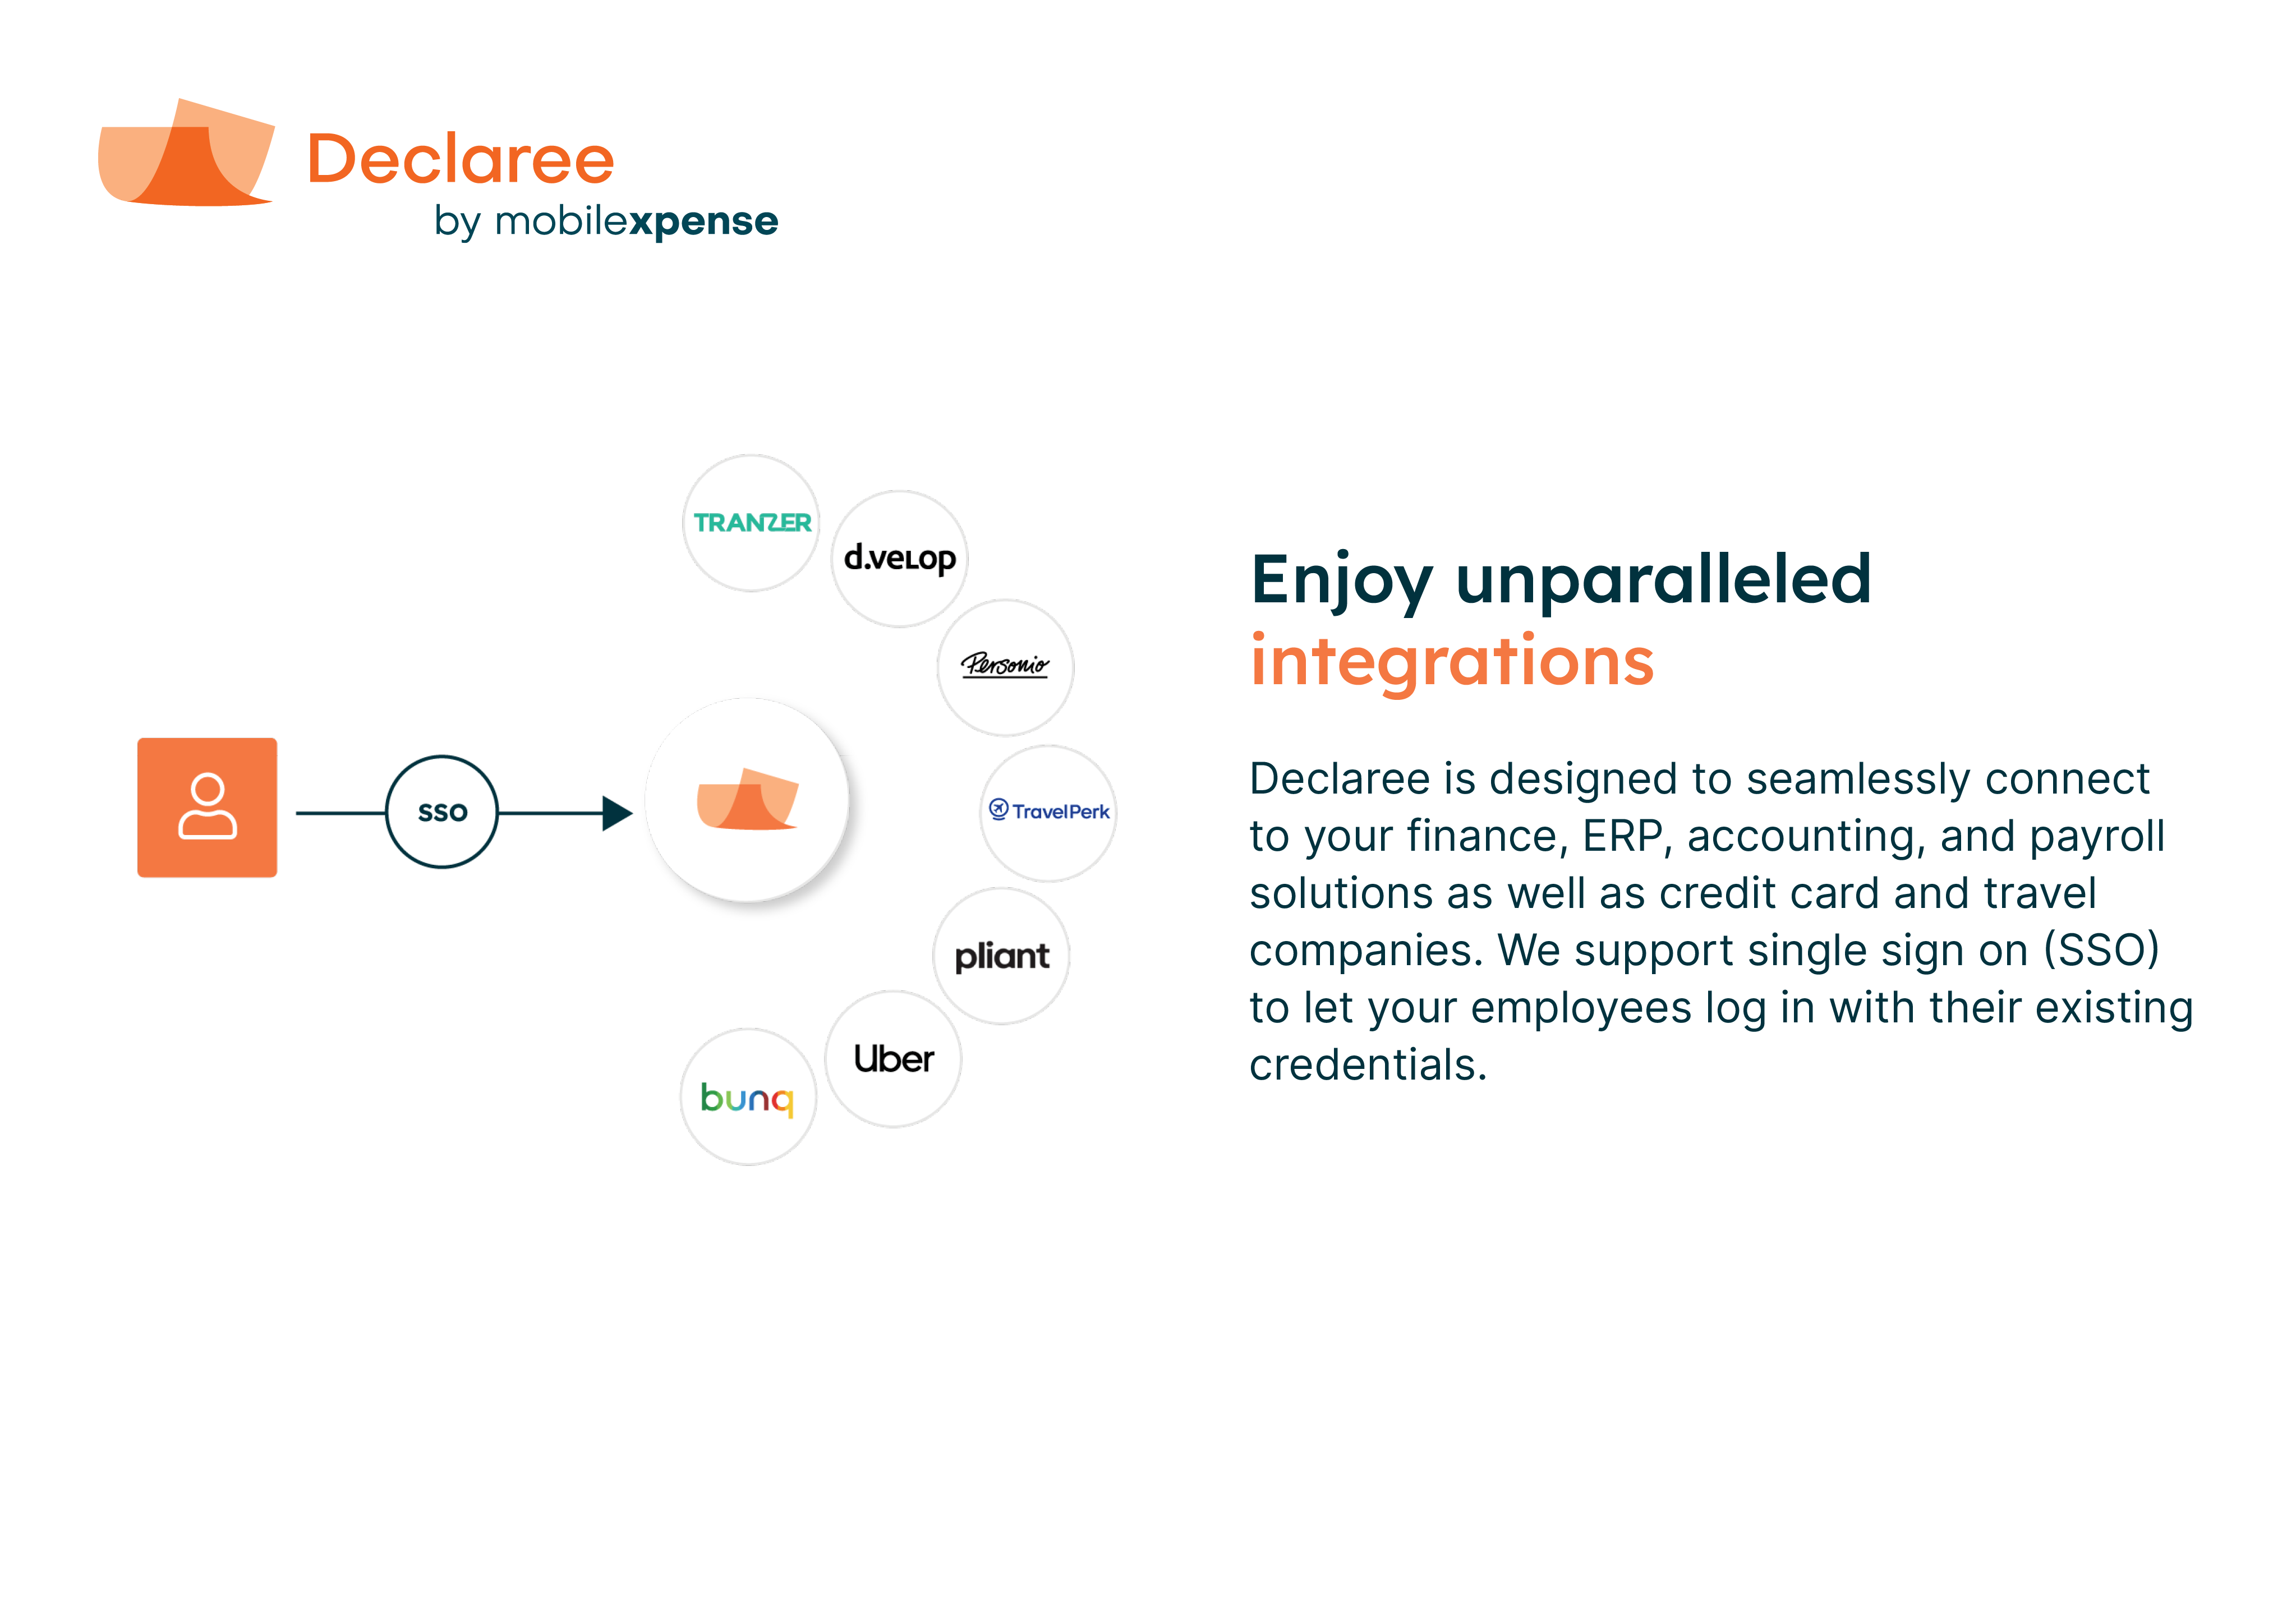 Declaree is designed to seamlessly connect to your finance, ERP, accounting, and payroll solutions as well as credit card and travel companies. We support single sign on (SSO) to let your employees log in with their existing credentials.